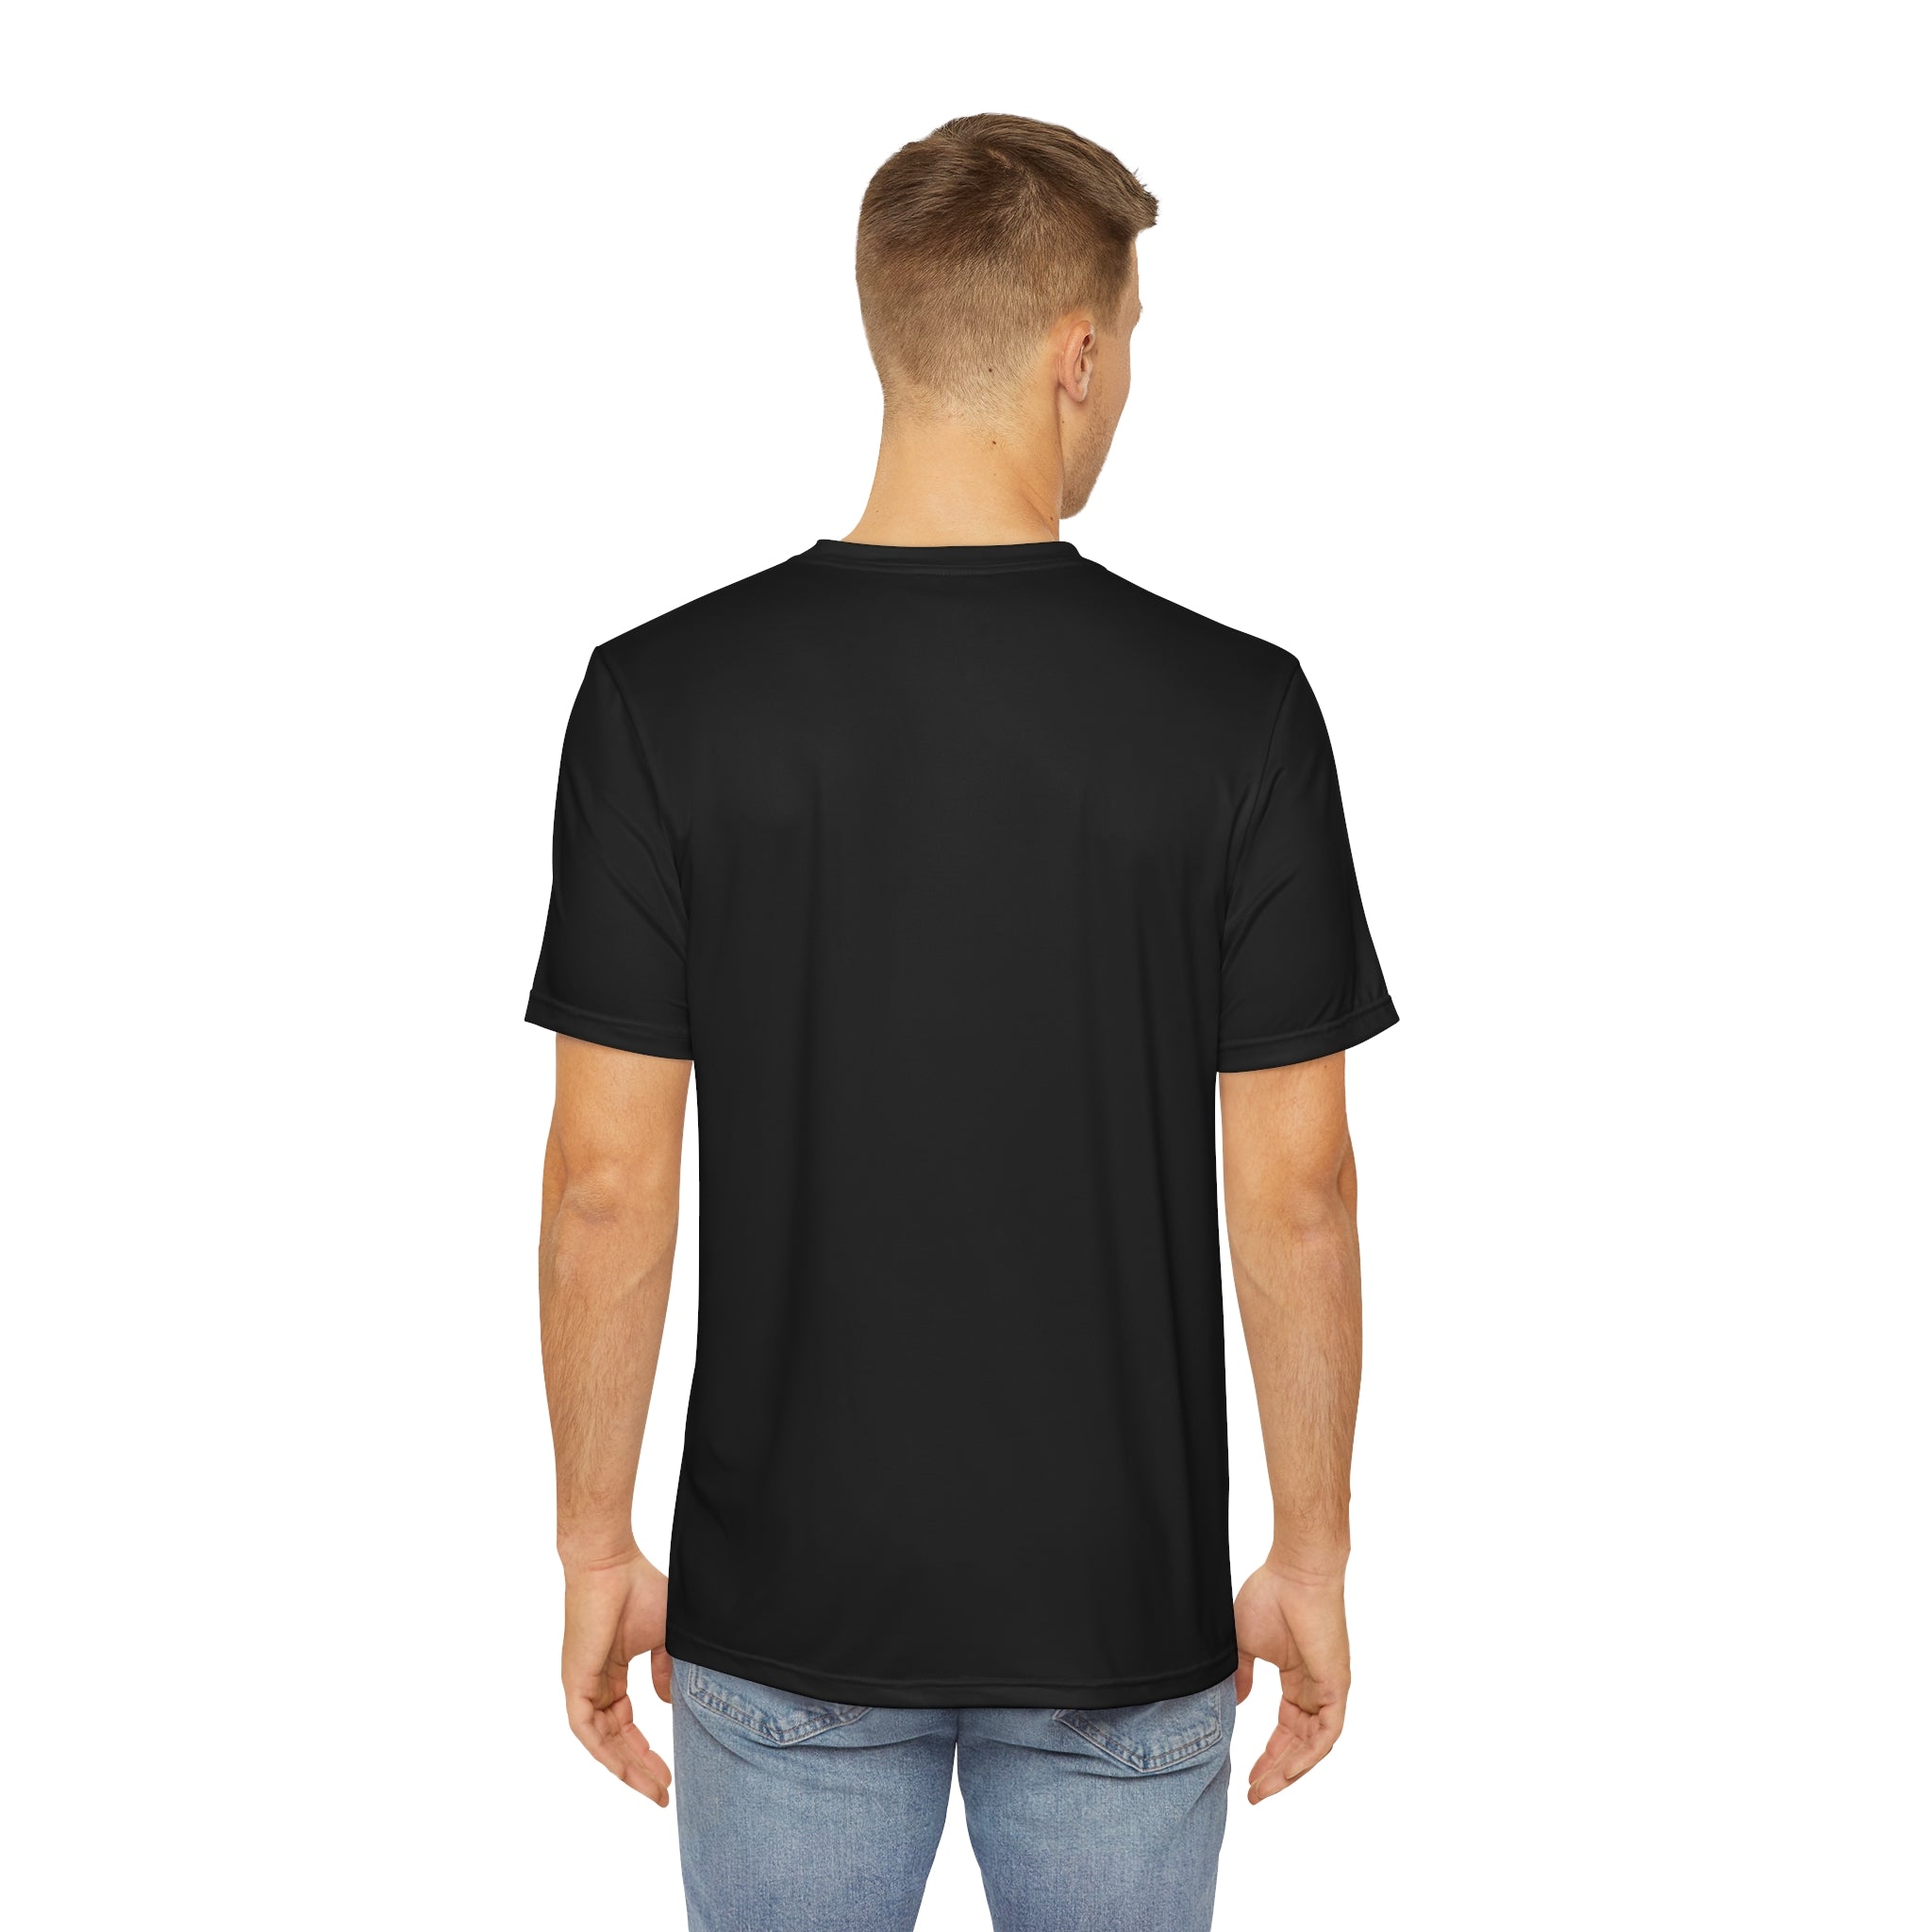 Mental Health Matters T-Shirt: Wear Your Support Athleisure Wear Comfort Masculinity Mental Wellness Pledge Donation Polyester All Over Prints 8697657667496172990_2048 Printify